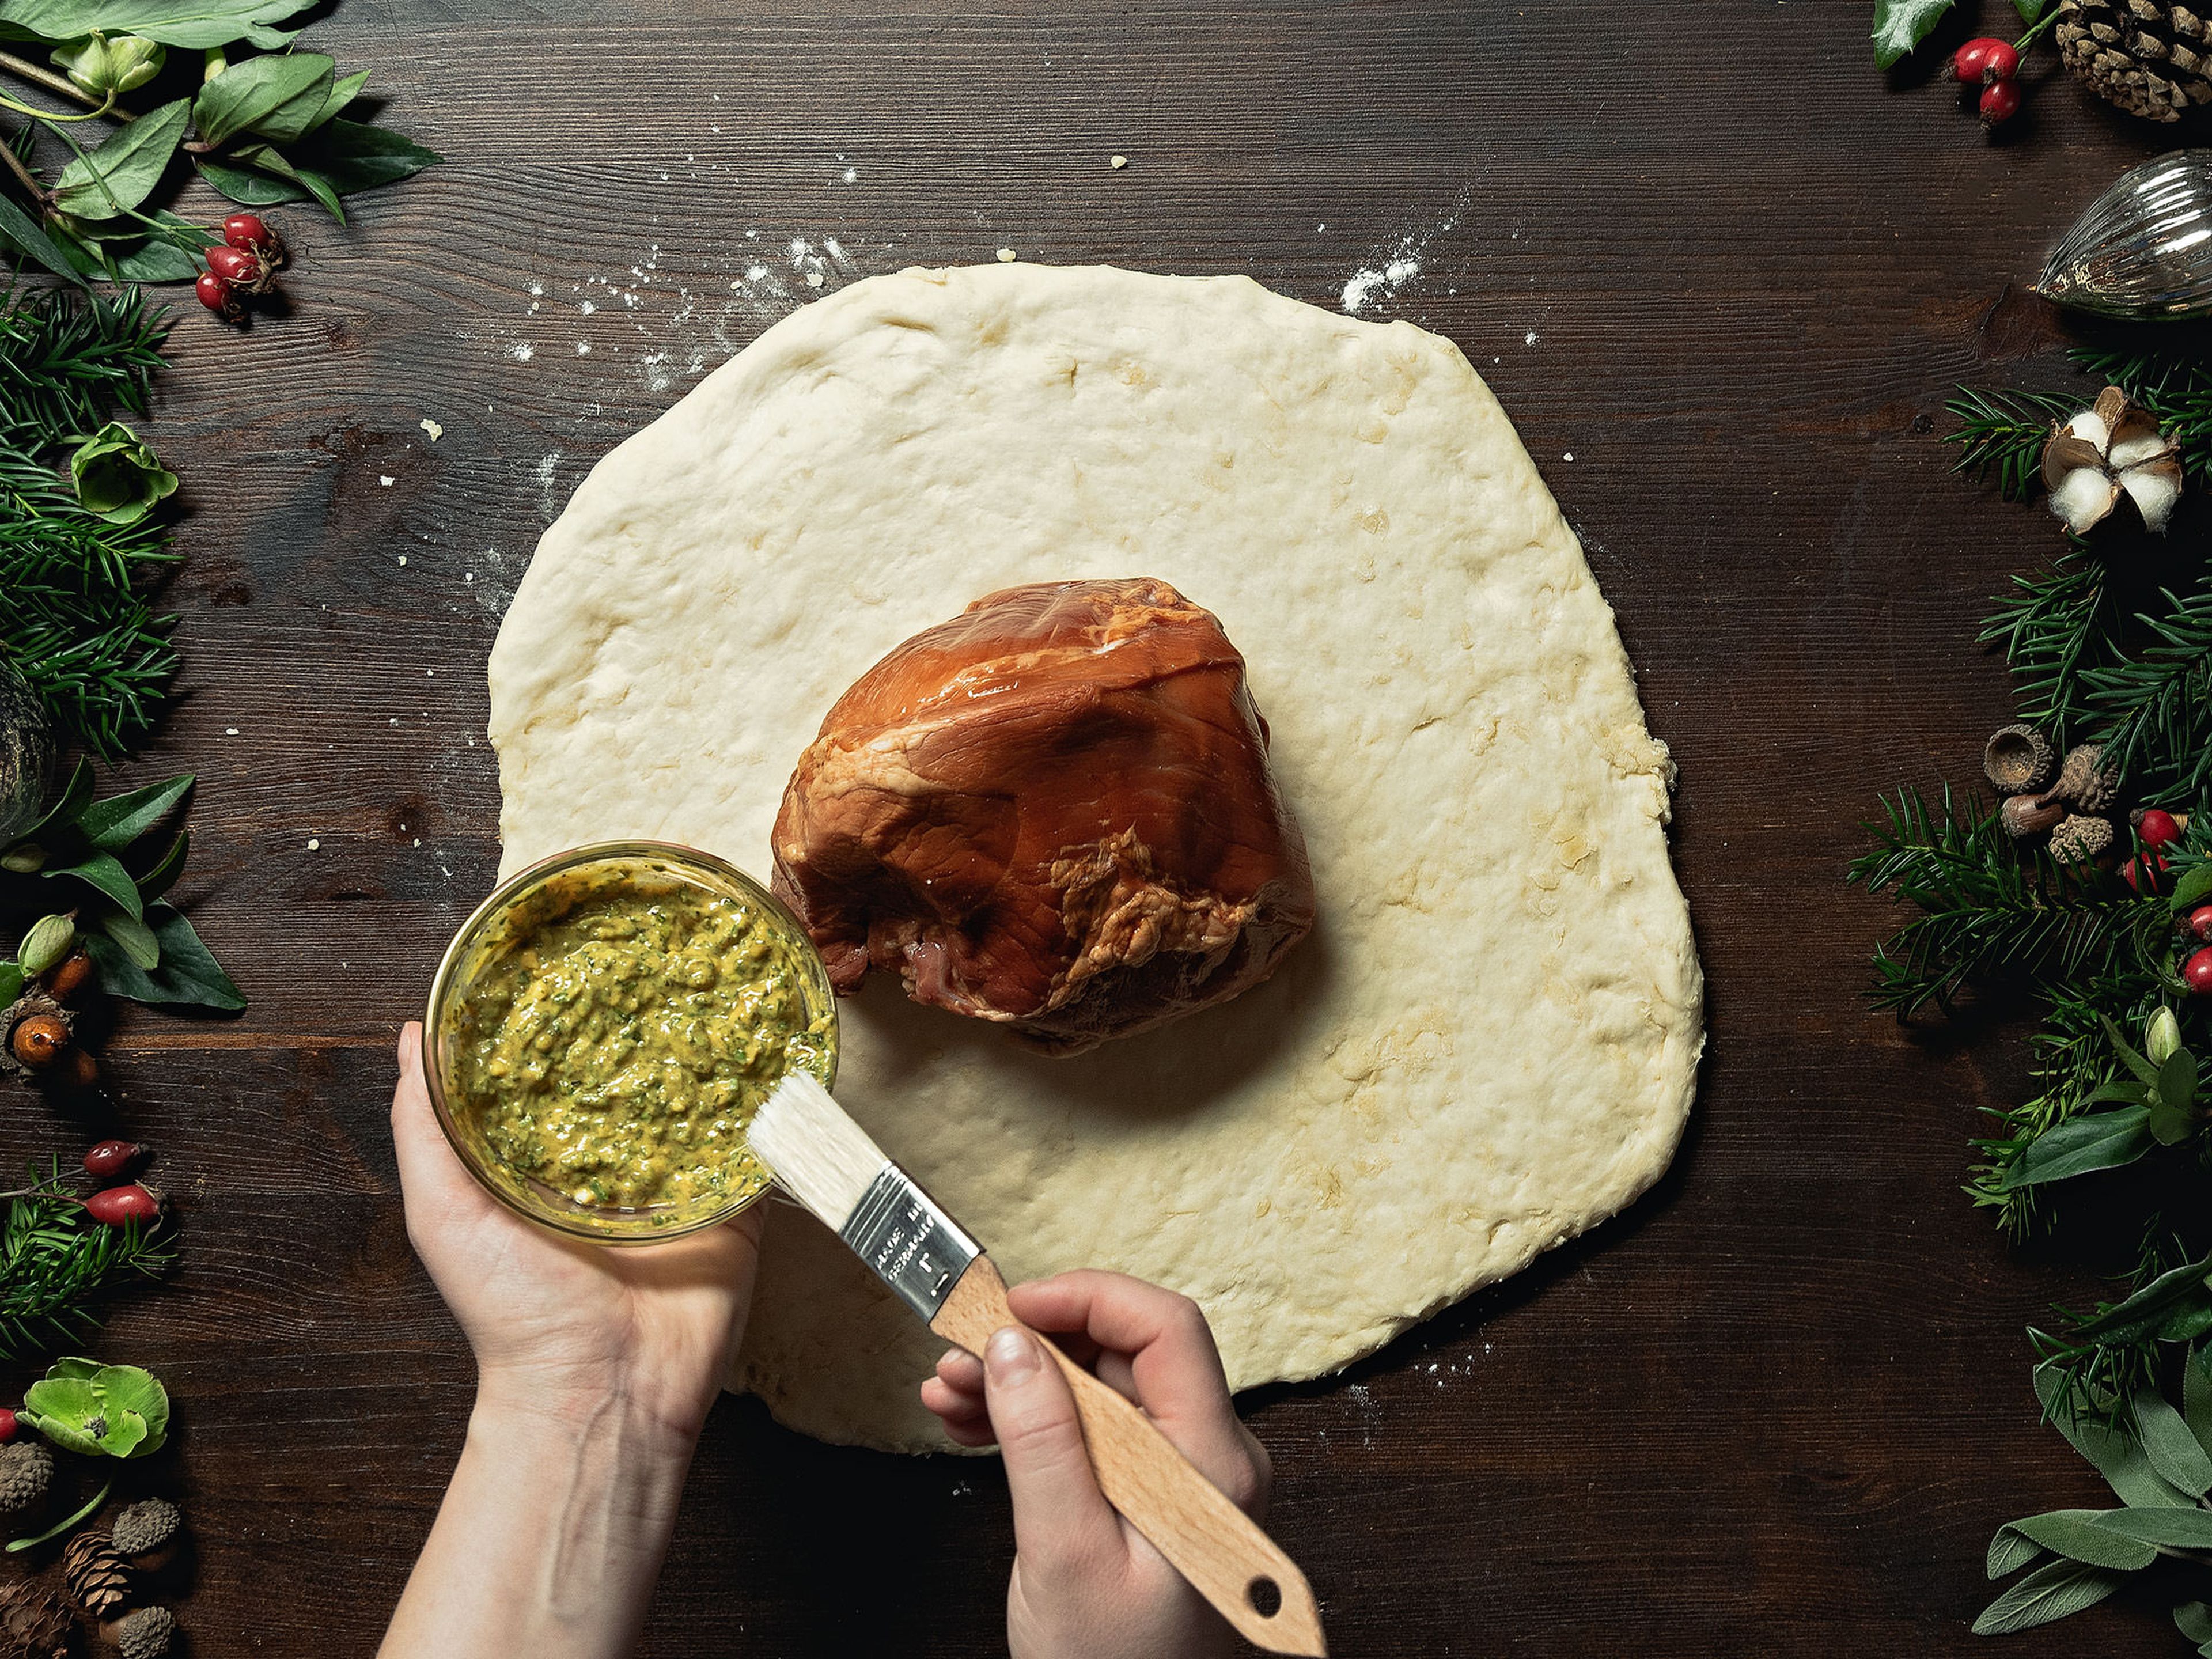 Preheat the oven to 165°C/325°F. Roll out the bread dough on a floured work surface. Put the ham on top and brush with the mustard-herb mixture. Use a bench scraper to help you wrap the ham in the dough. Place on a parchment paper-lined baking sheet and let rest for approx. 30 min., then bake for approx. 40 min.